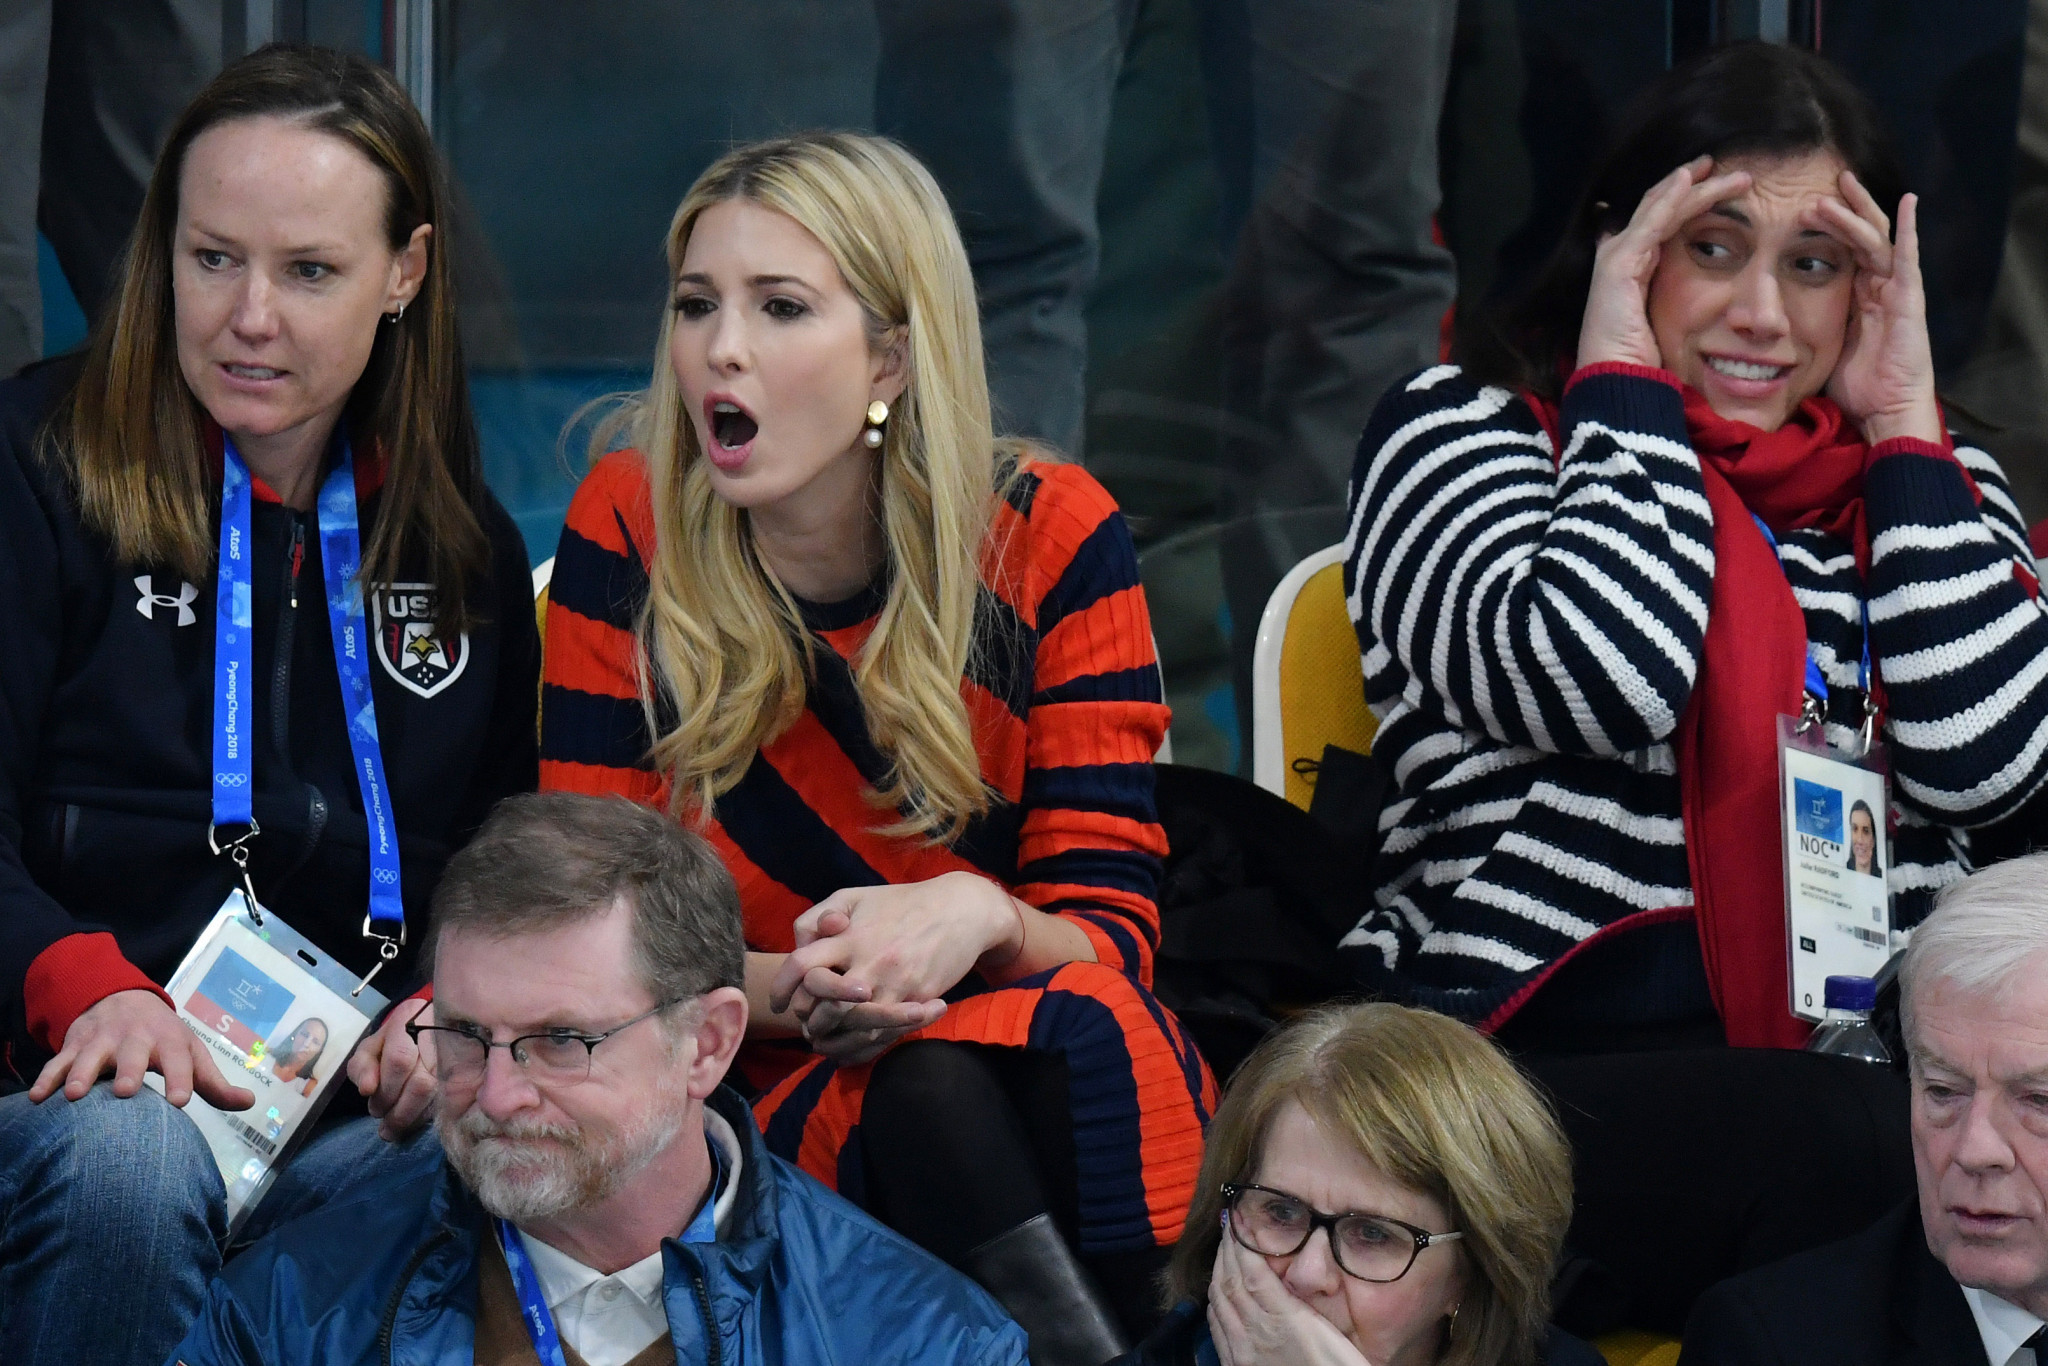 US President Donald Trump's daughter Ivanka was among the spectators at the Gangneung Curling Centre having been officially confirmed as leading the American delegation attending the Closing Ceremony of Pyeongchang 2018 tomorrow ©Getty Images